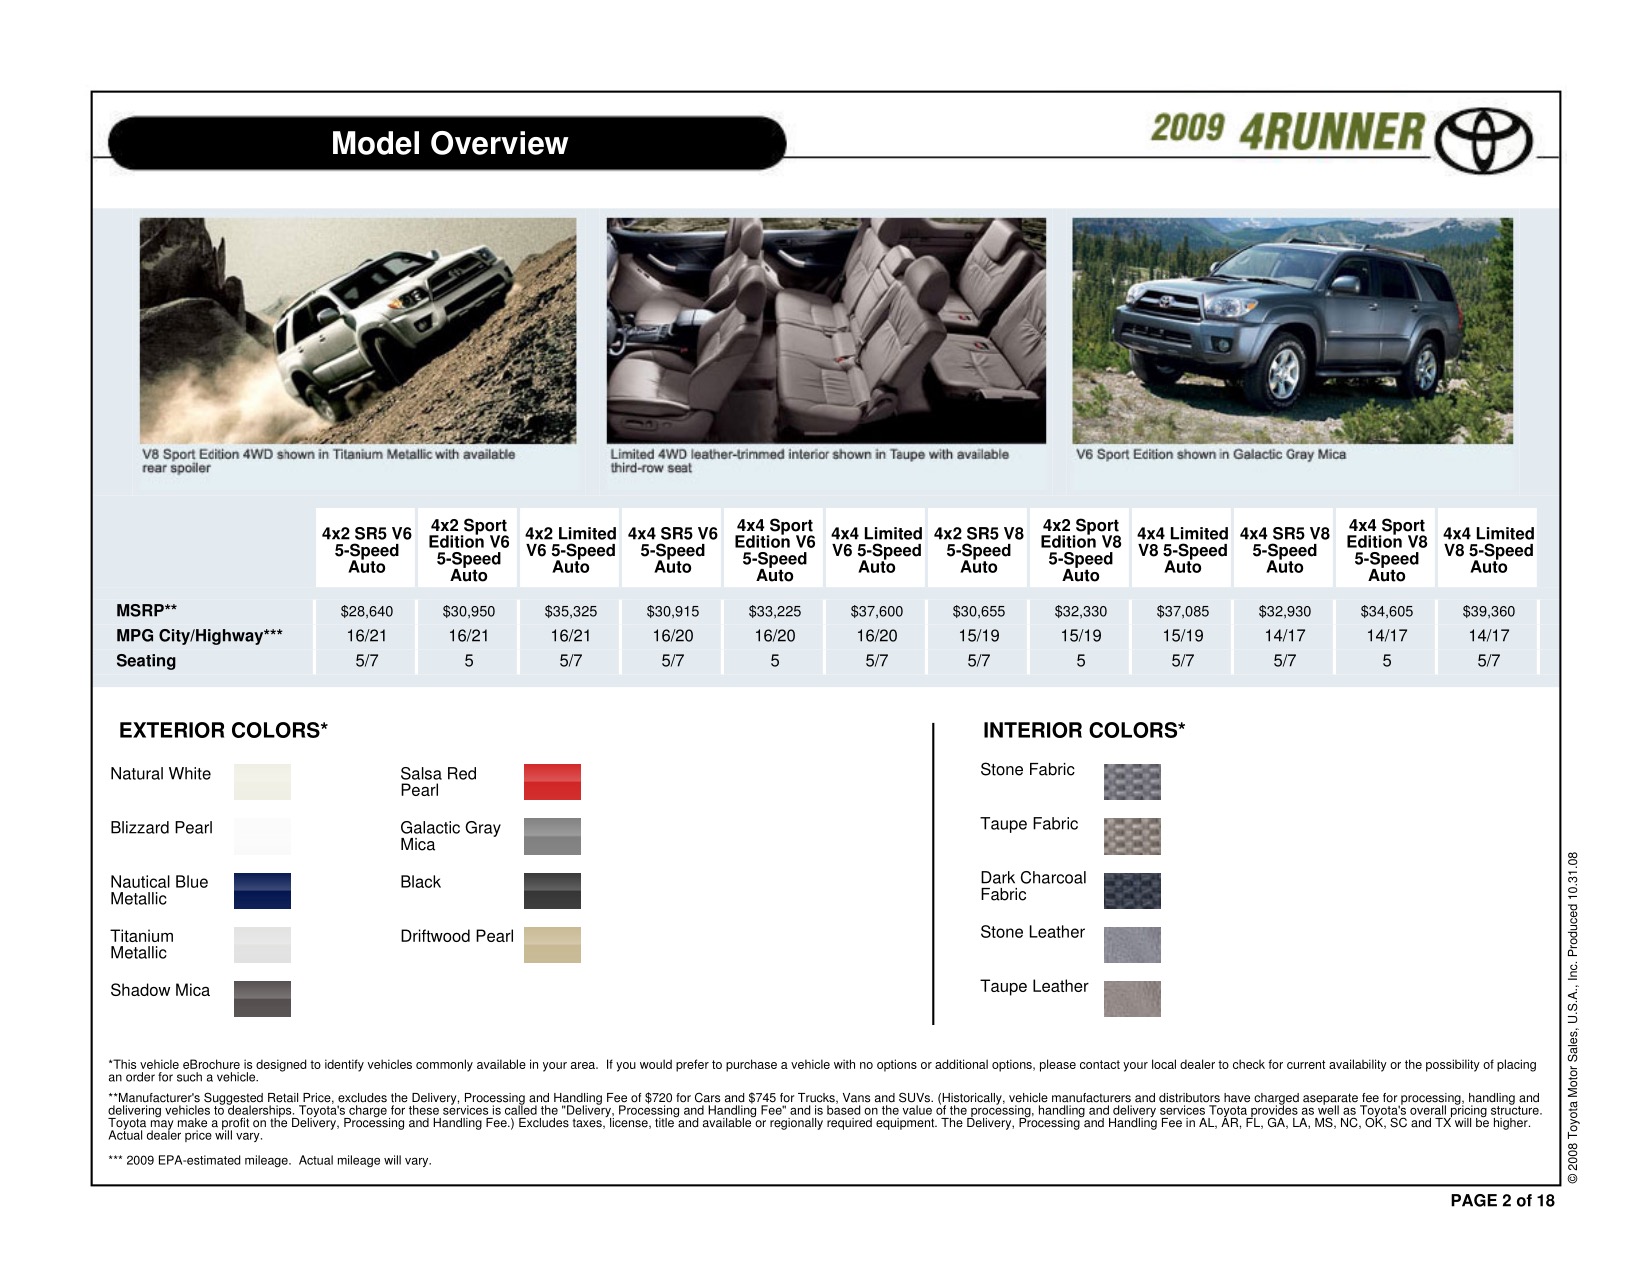 2009 Toyota 4Runner Brochure Page 18